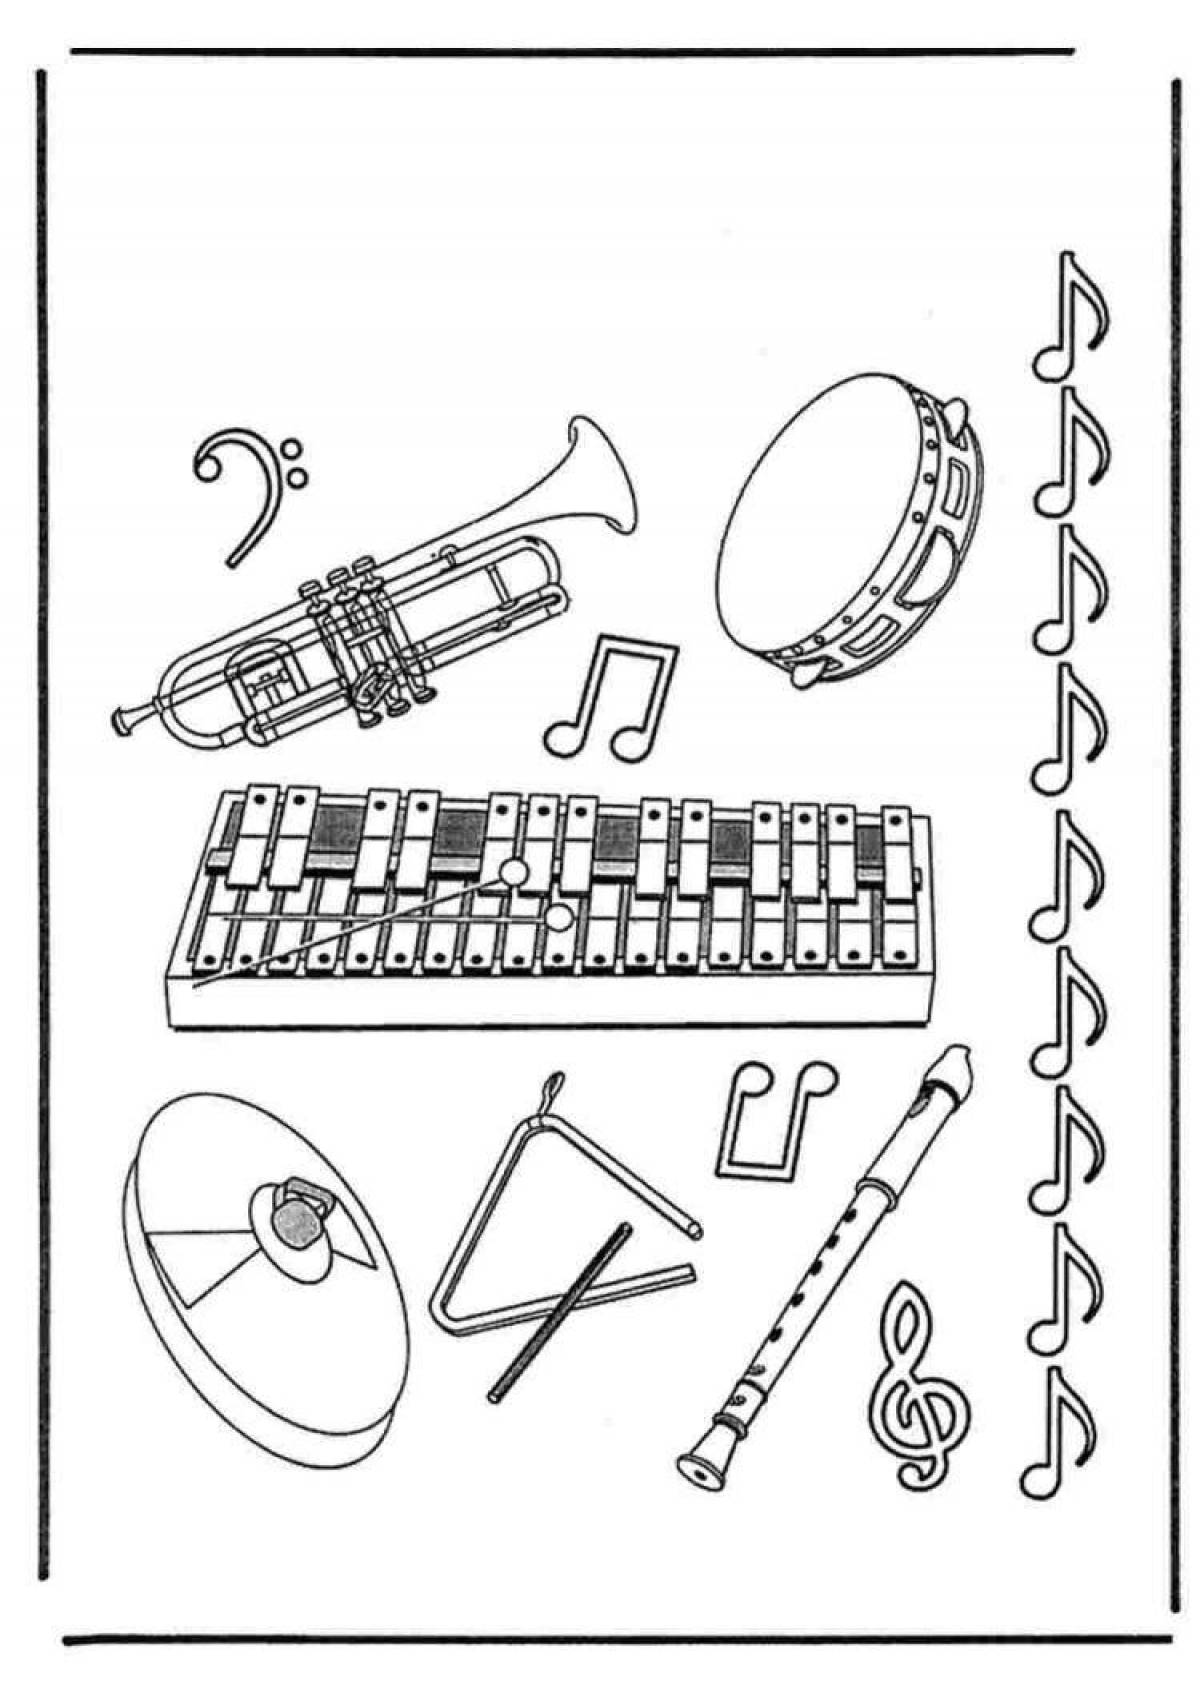 Colorful musical coloring book for the maestro of music